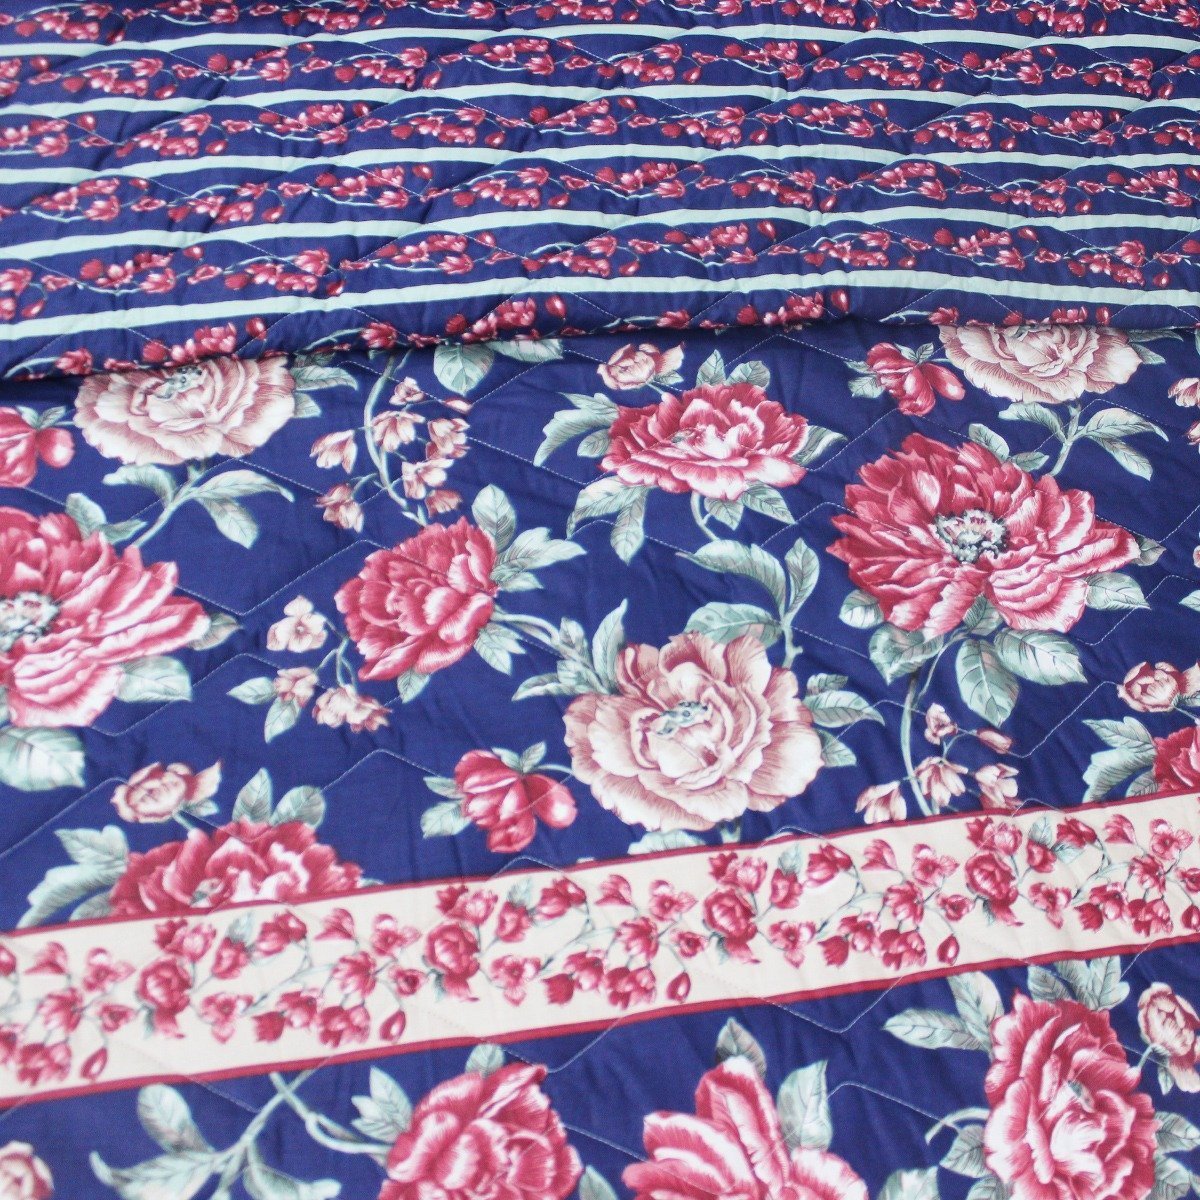 Blue Summer - Cotton Bed Spread Set - 6 pc - waseeh.com